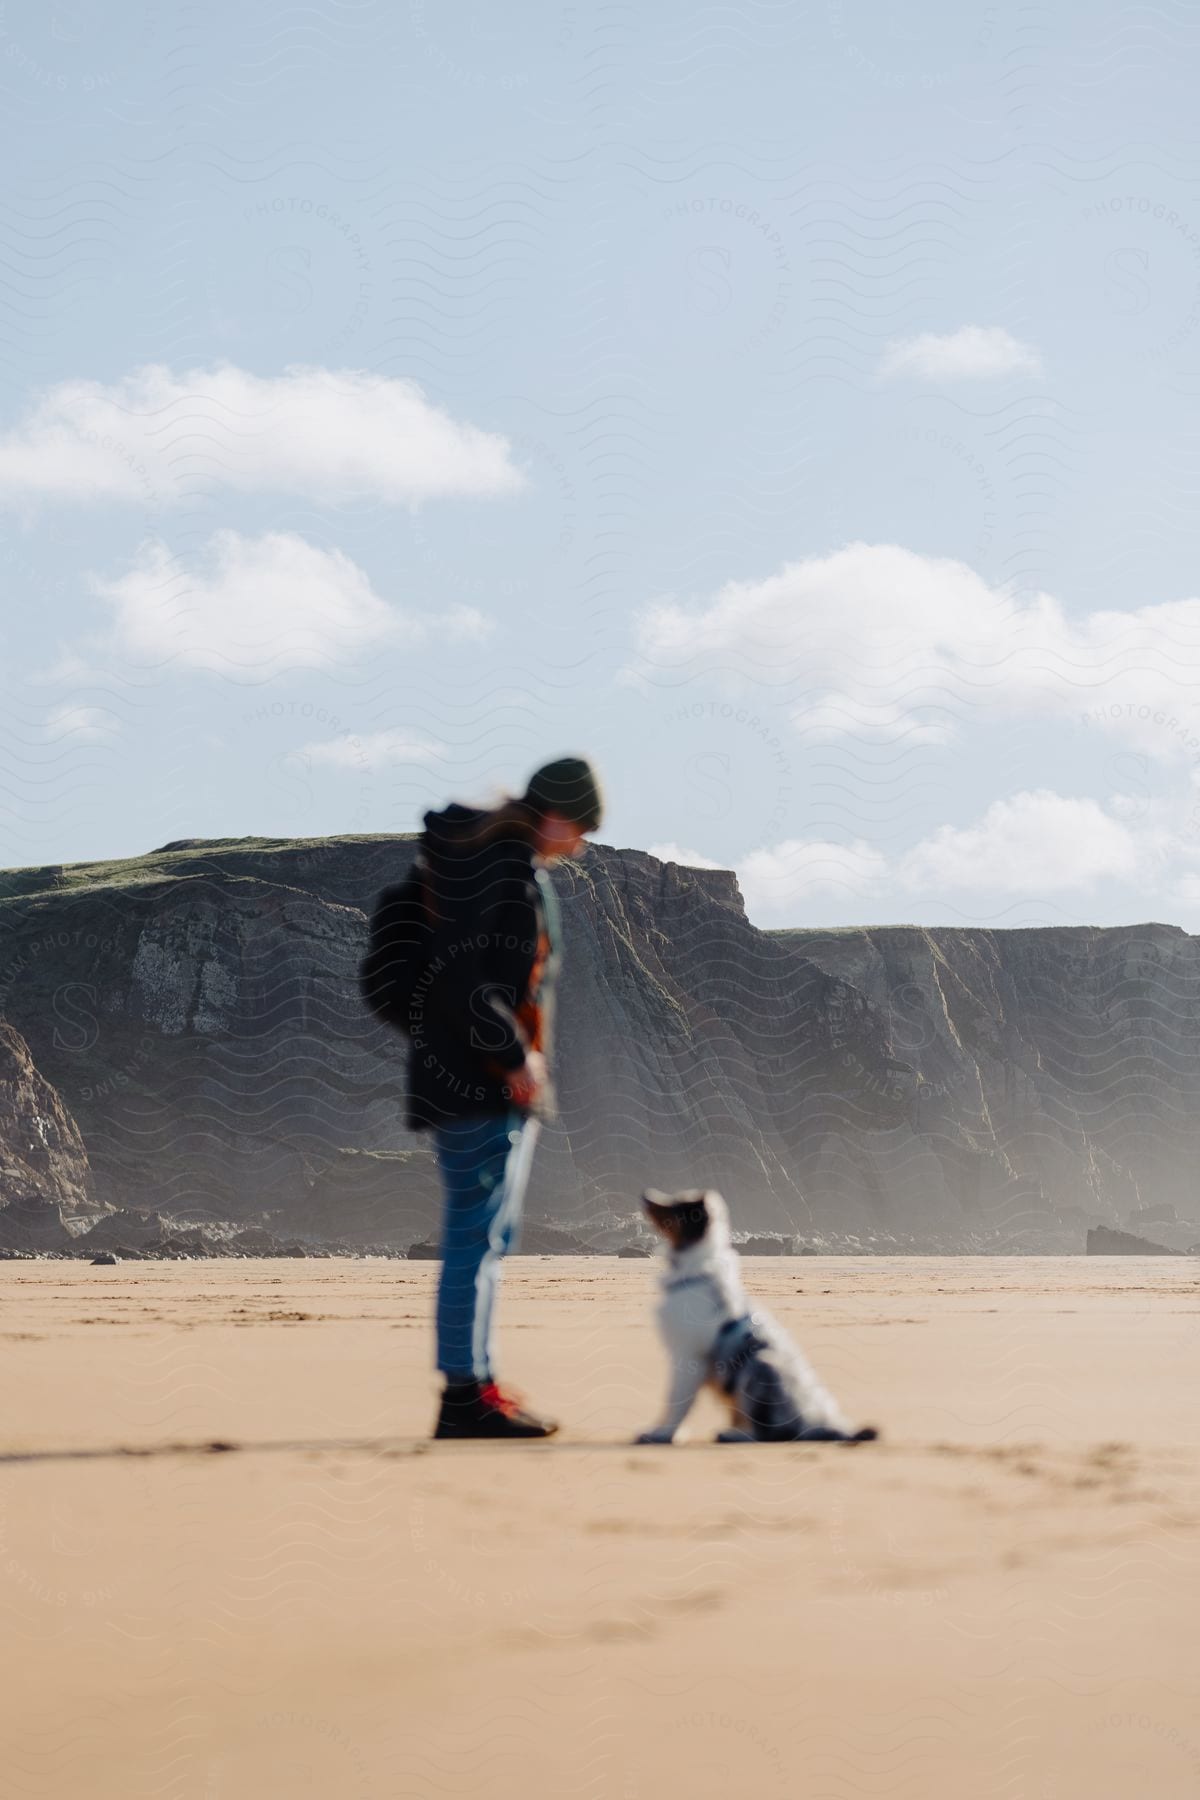 Person with a backpack and dog on a sandy beach, with cliffs in the background and a clear sky.